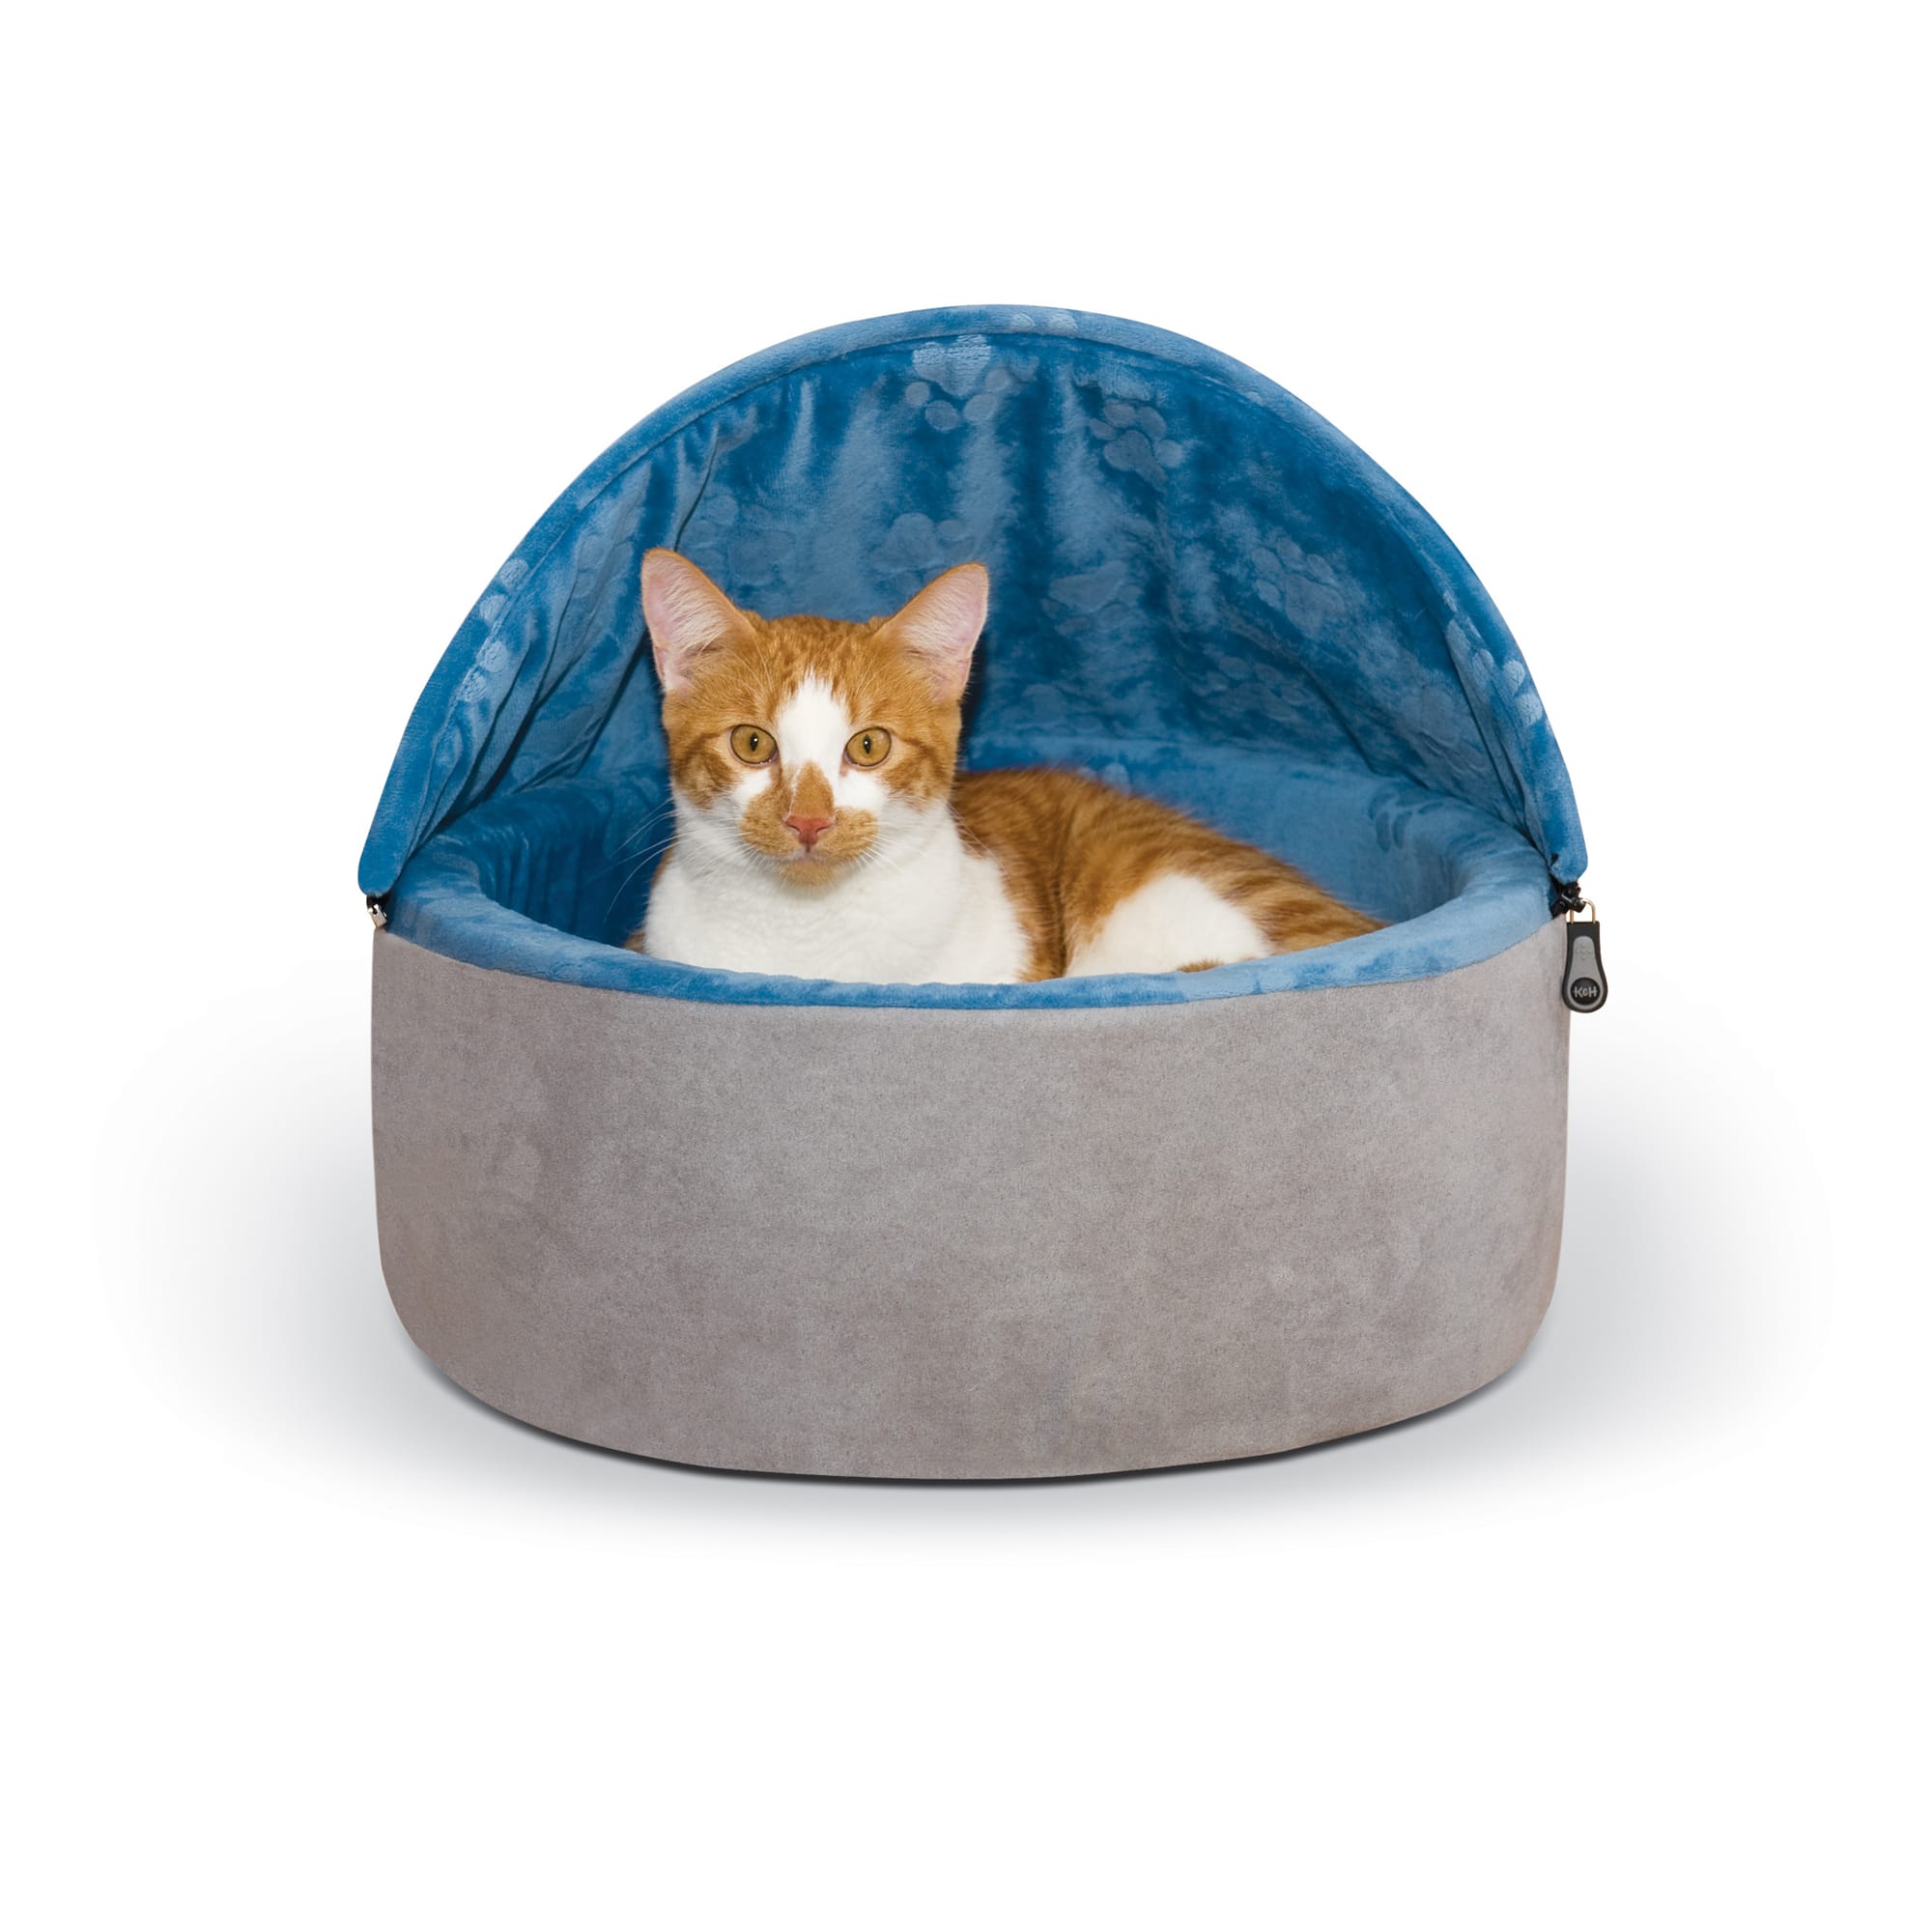 Photos - Cat Bed / House K&H Blue and Gray Self Warming Hooded Cat bed, 16" L x 16" W, Small, B 